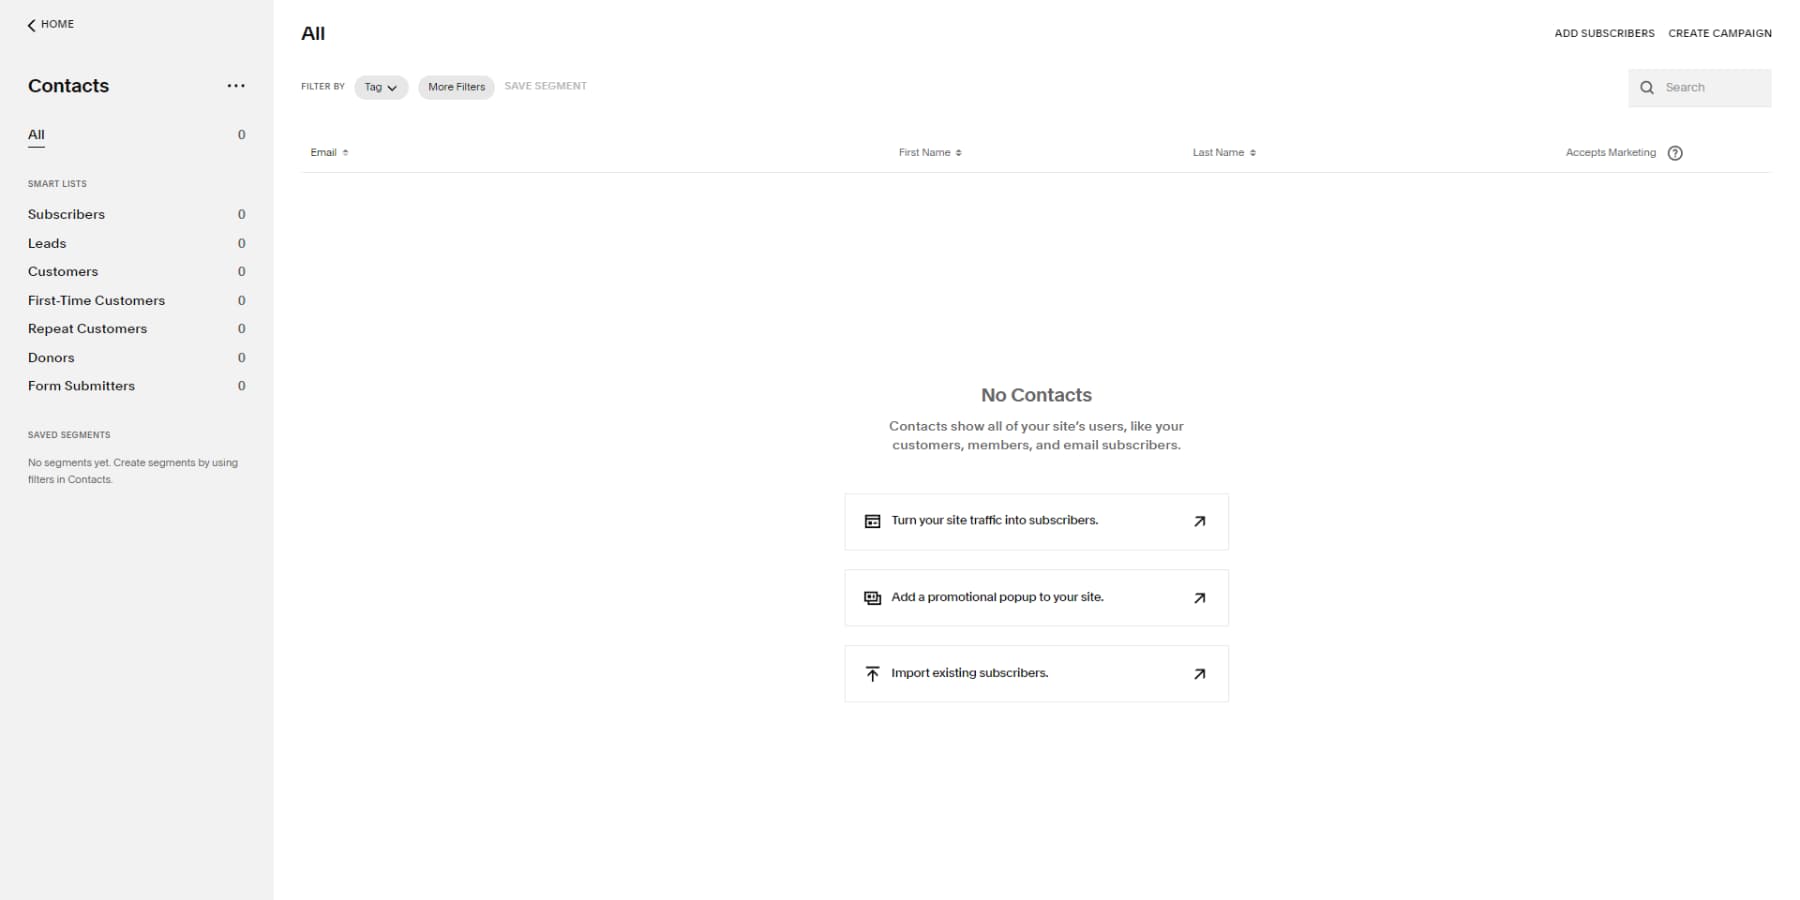 A screenshot of Squarespace's contact options panel